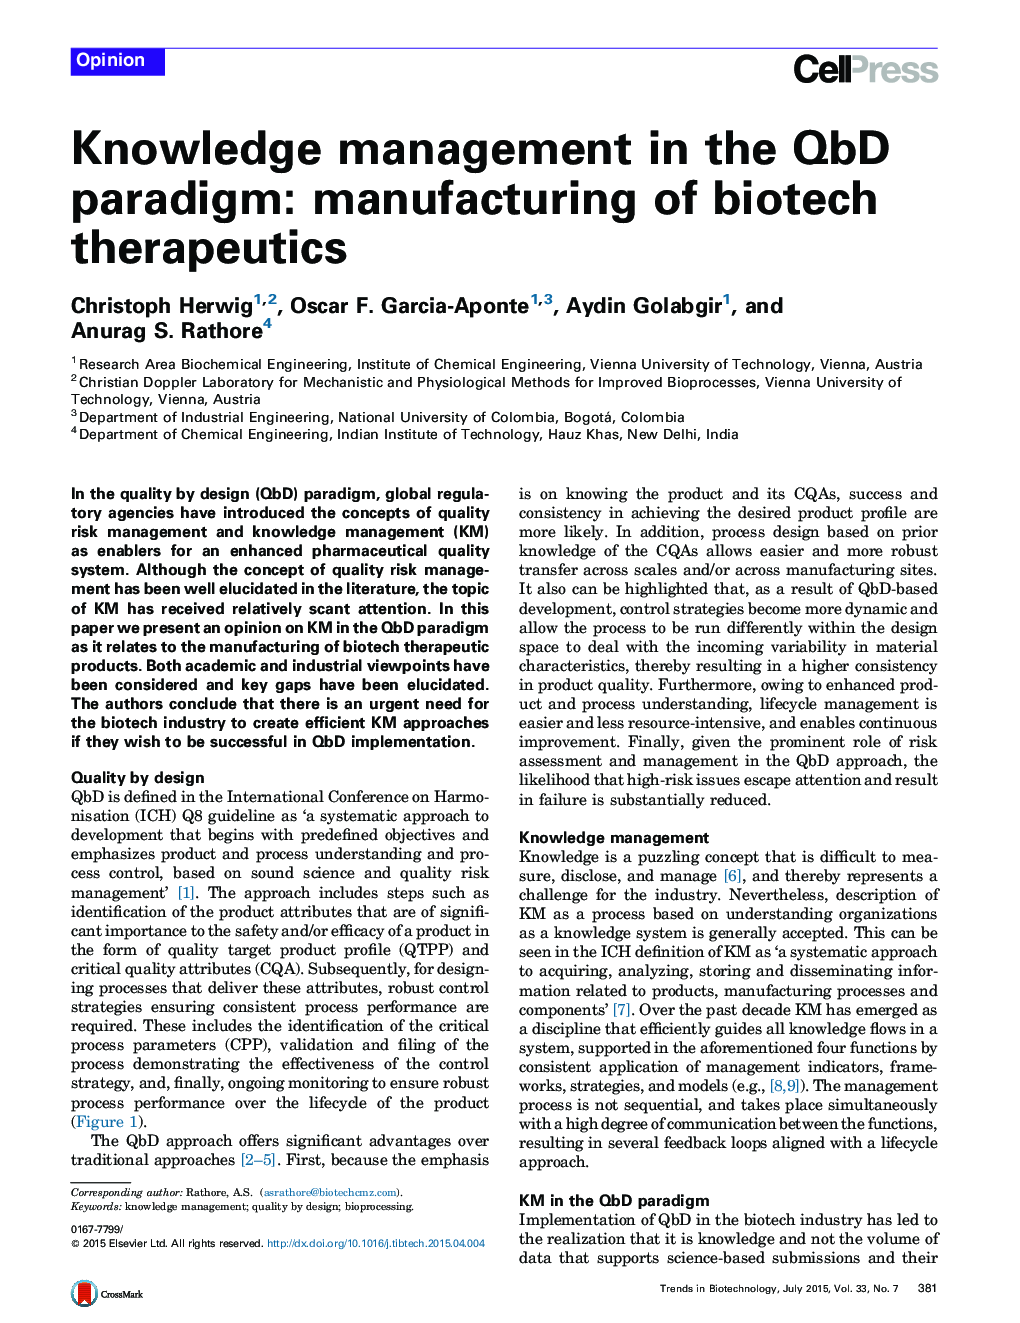 Knowledge management in the QbD paradigm: manufacturing of biotech therapeutics